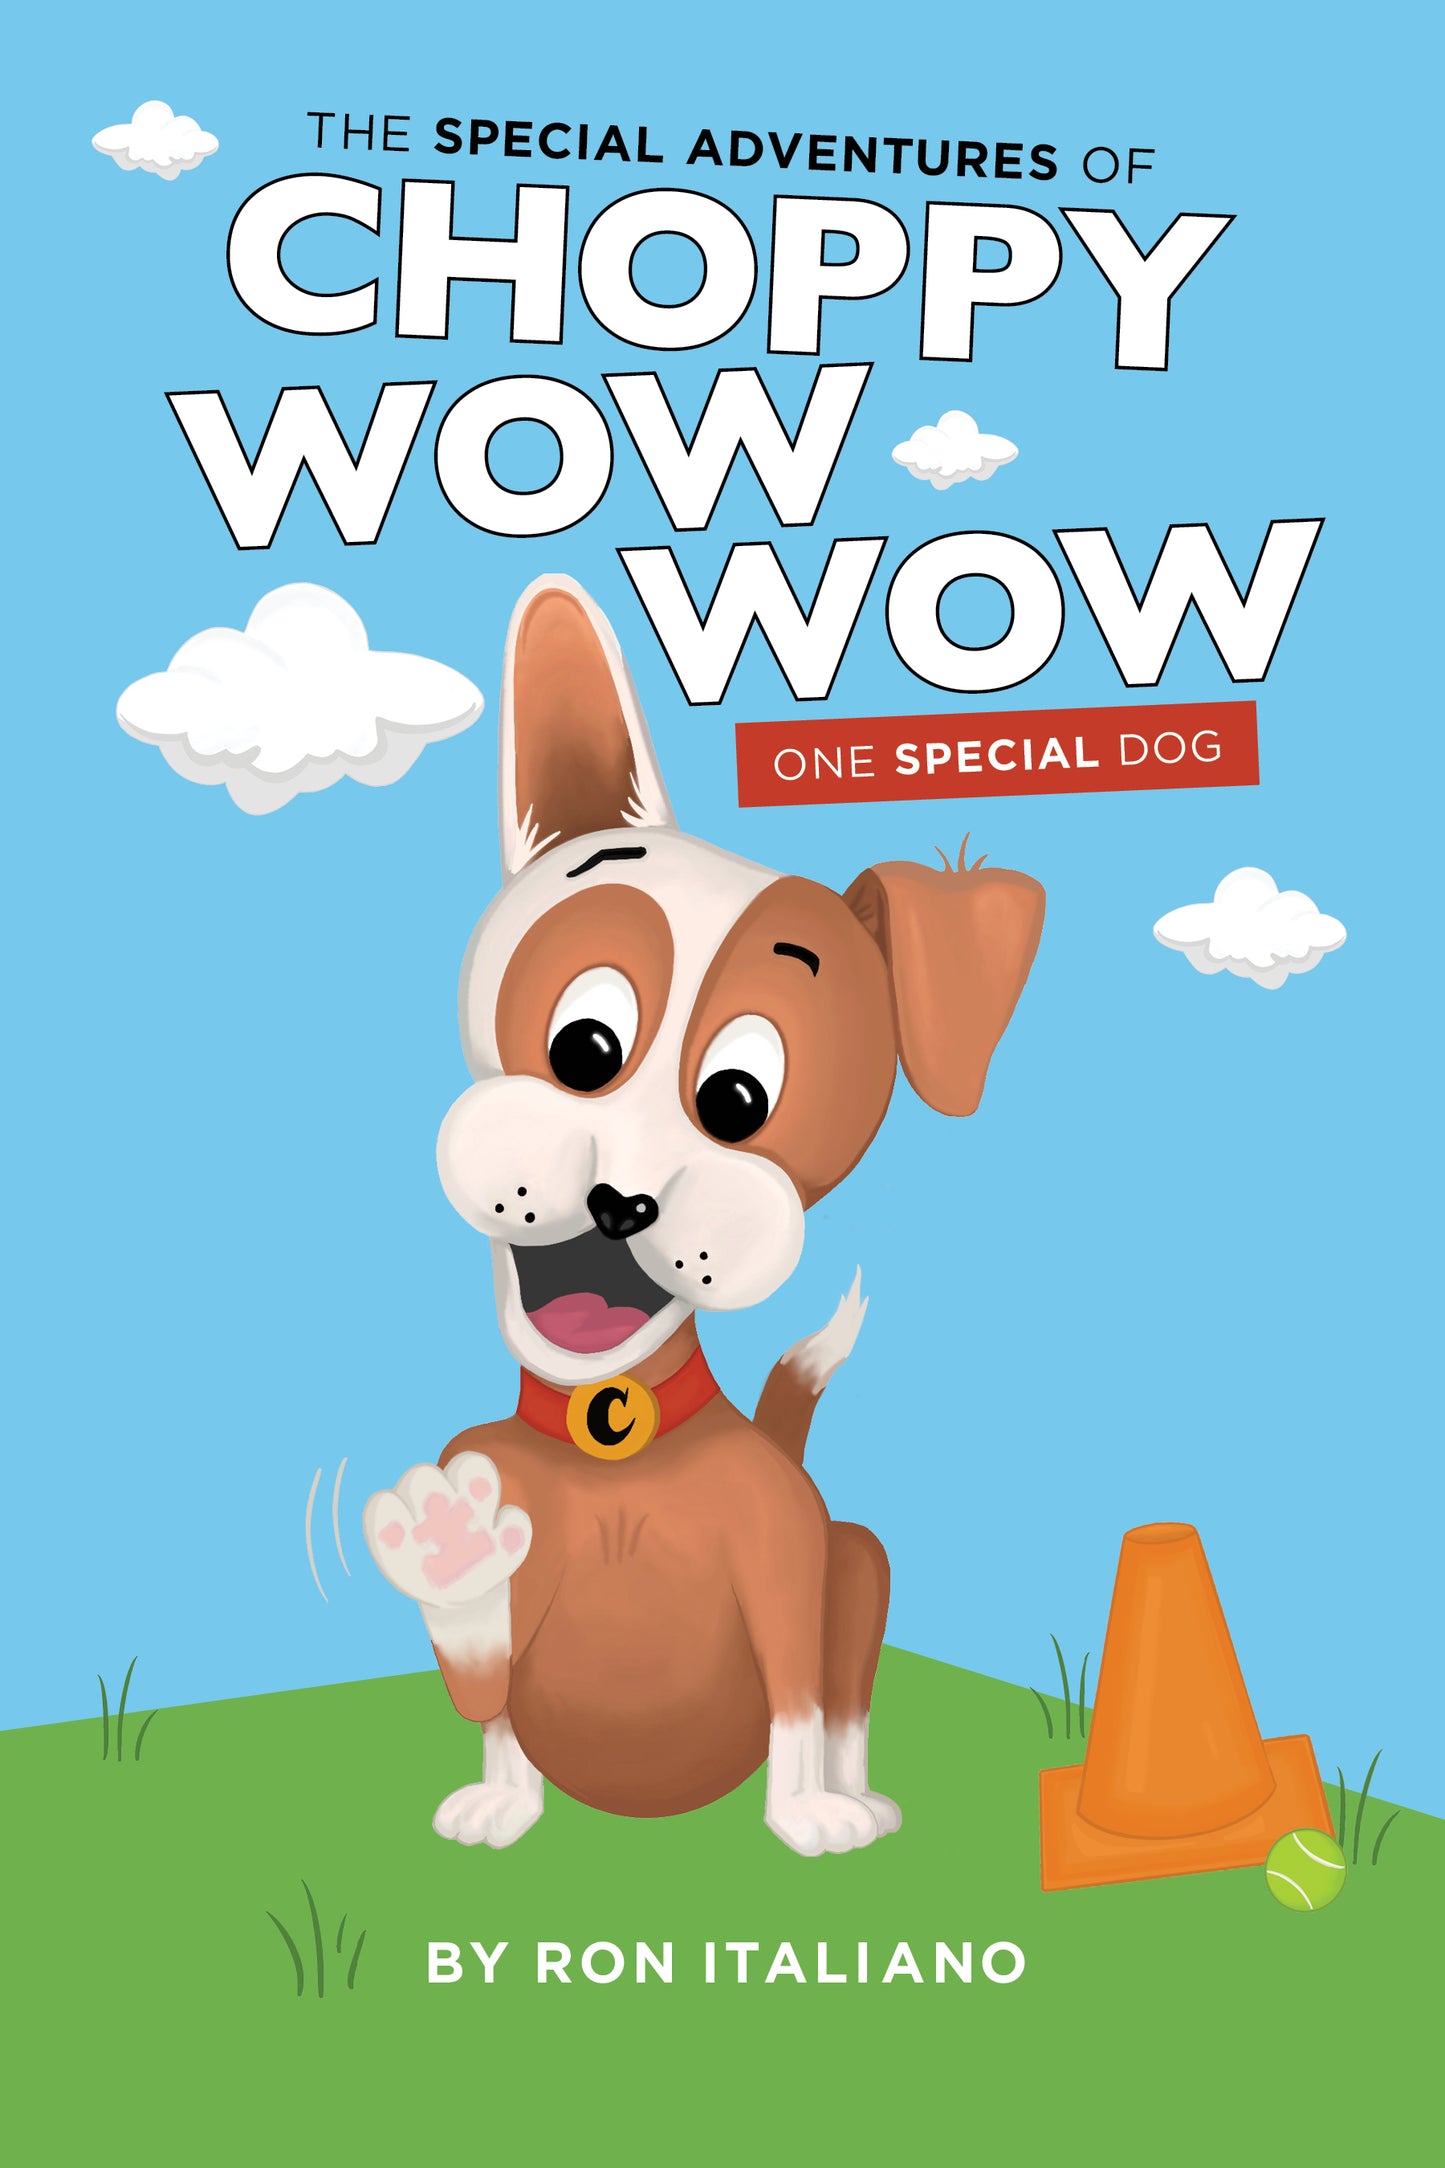 The Special Adventures of Choppy Wow Wow: One Special Dog